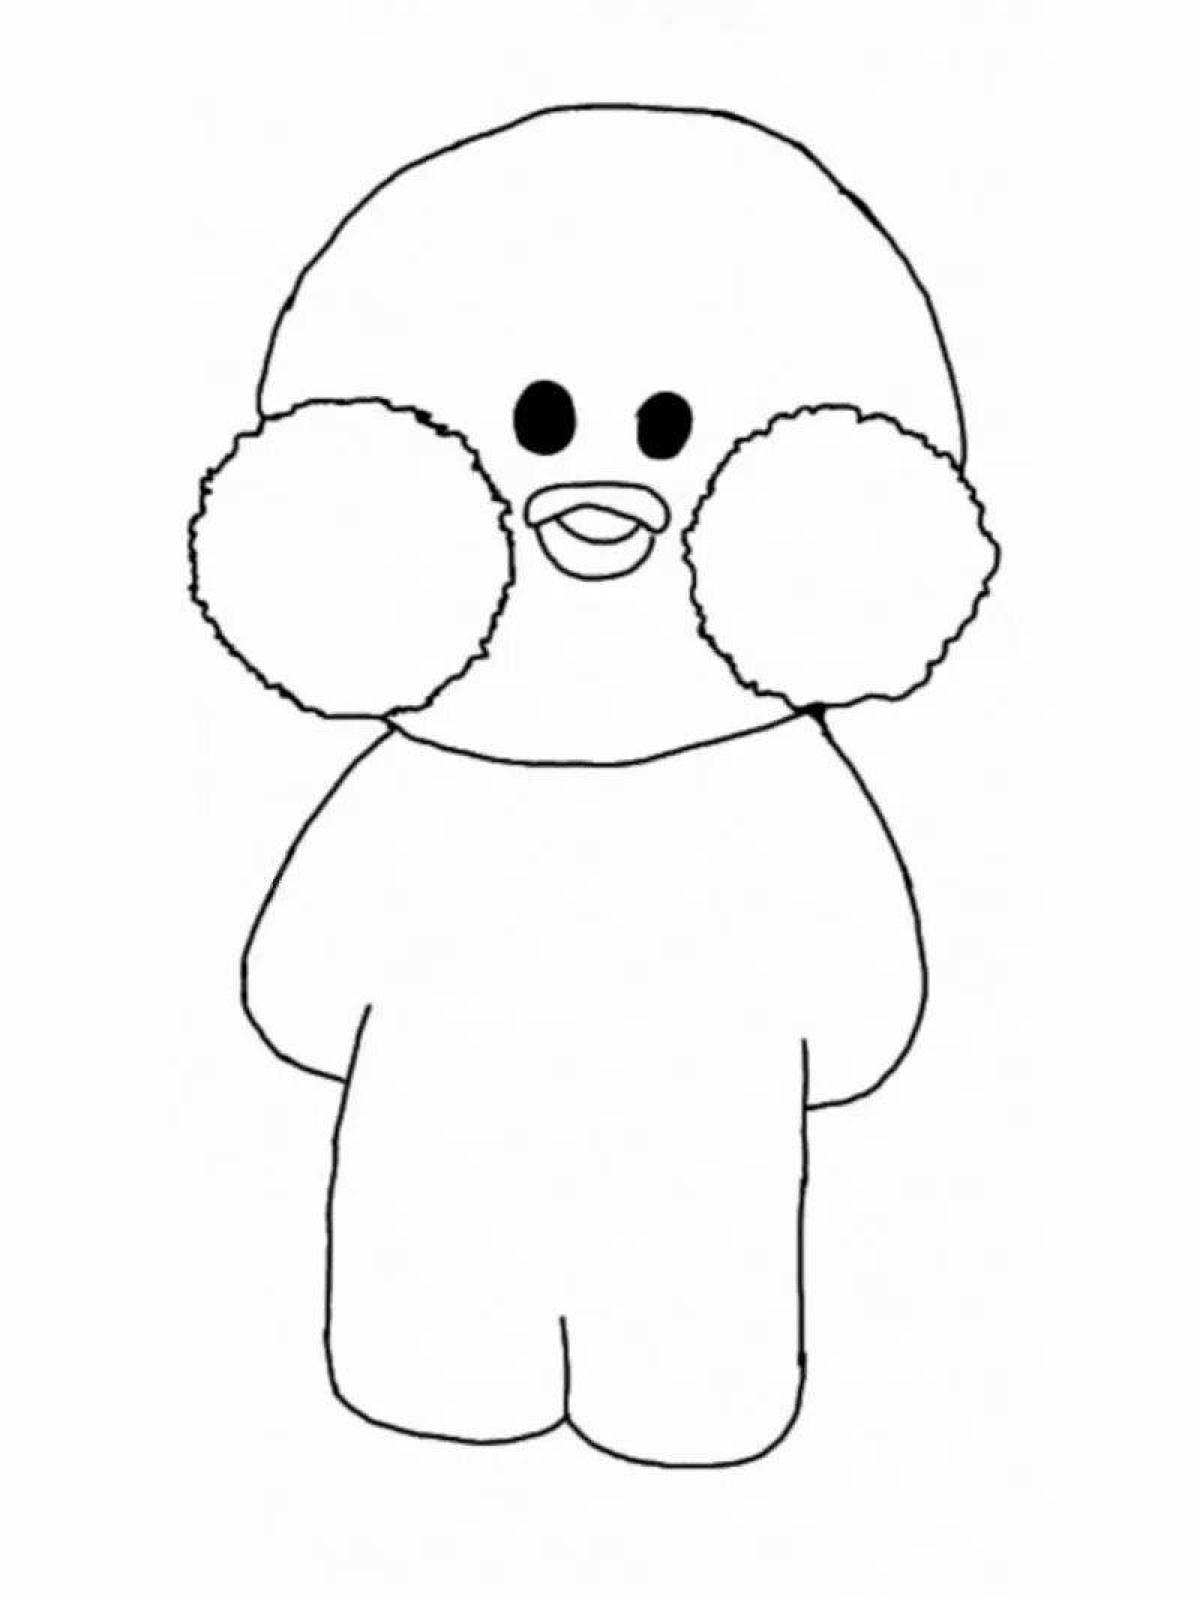 Lalafanfan funny duck coloring pages for kids